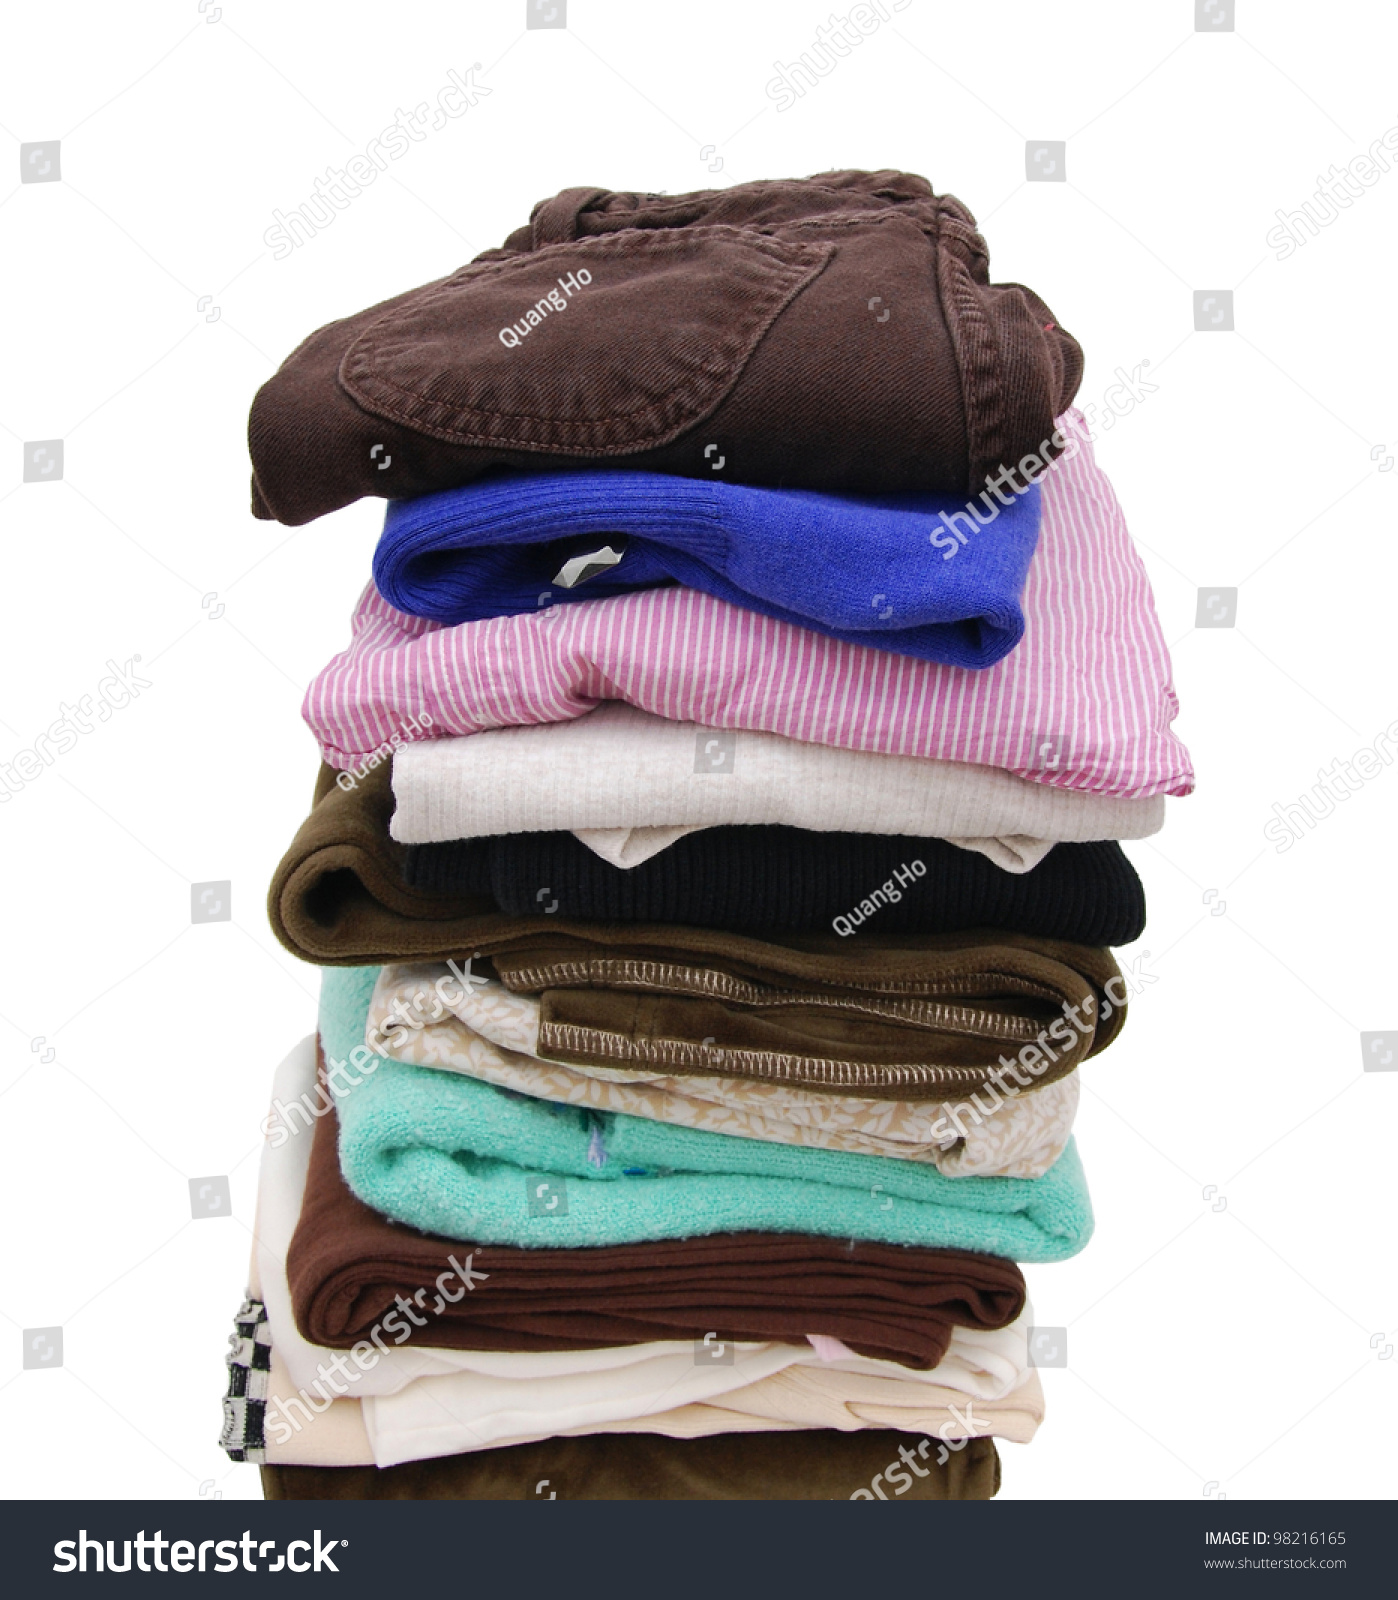 Pile Clean Clothes Stock Photo 98216165 - Shutterstock